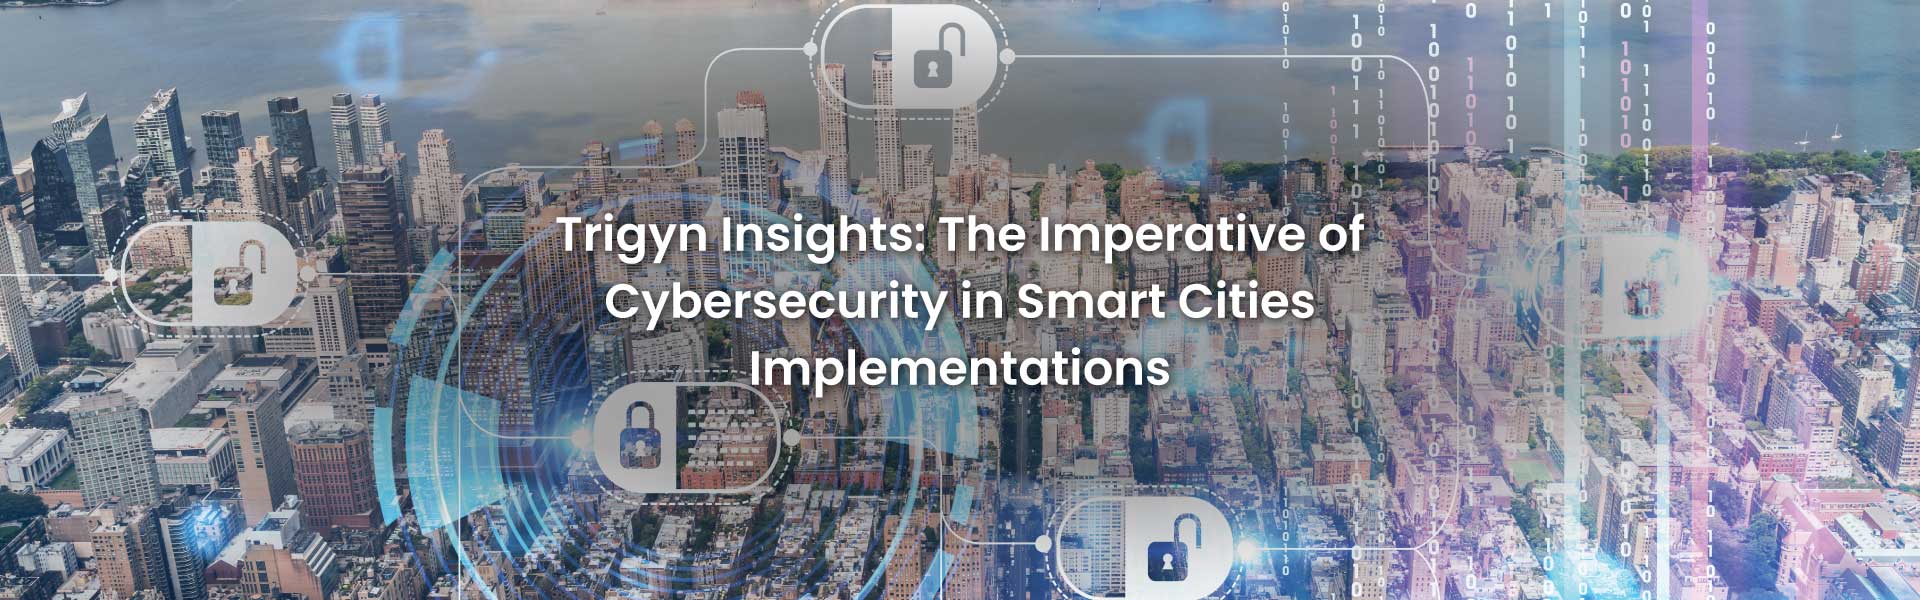 The Imperative of Cybersecurity in IoT and Smart Cities